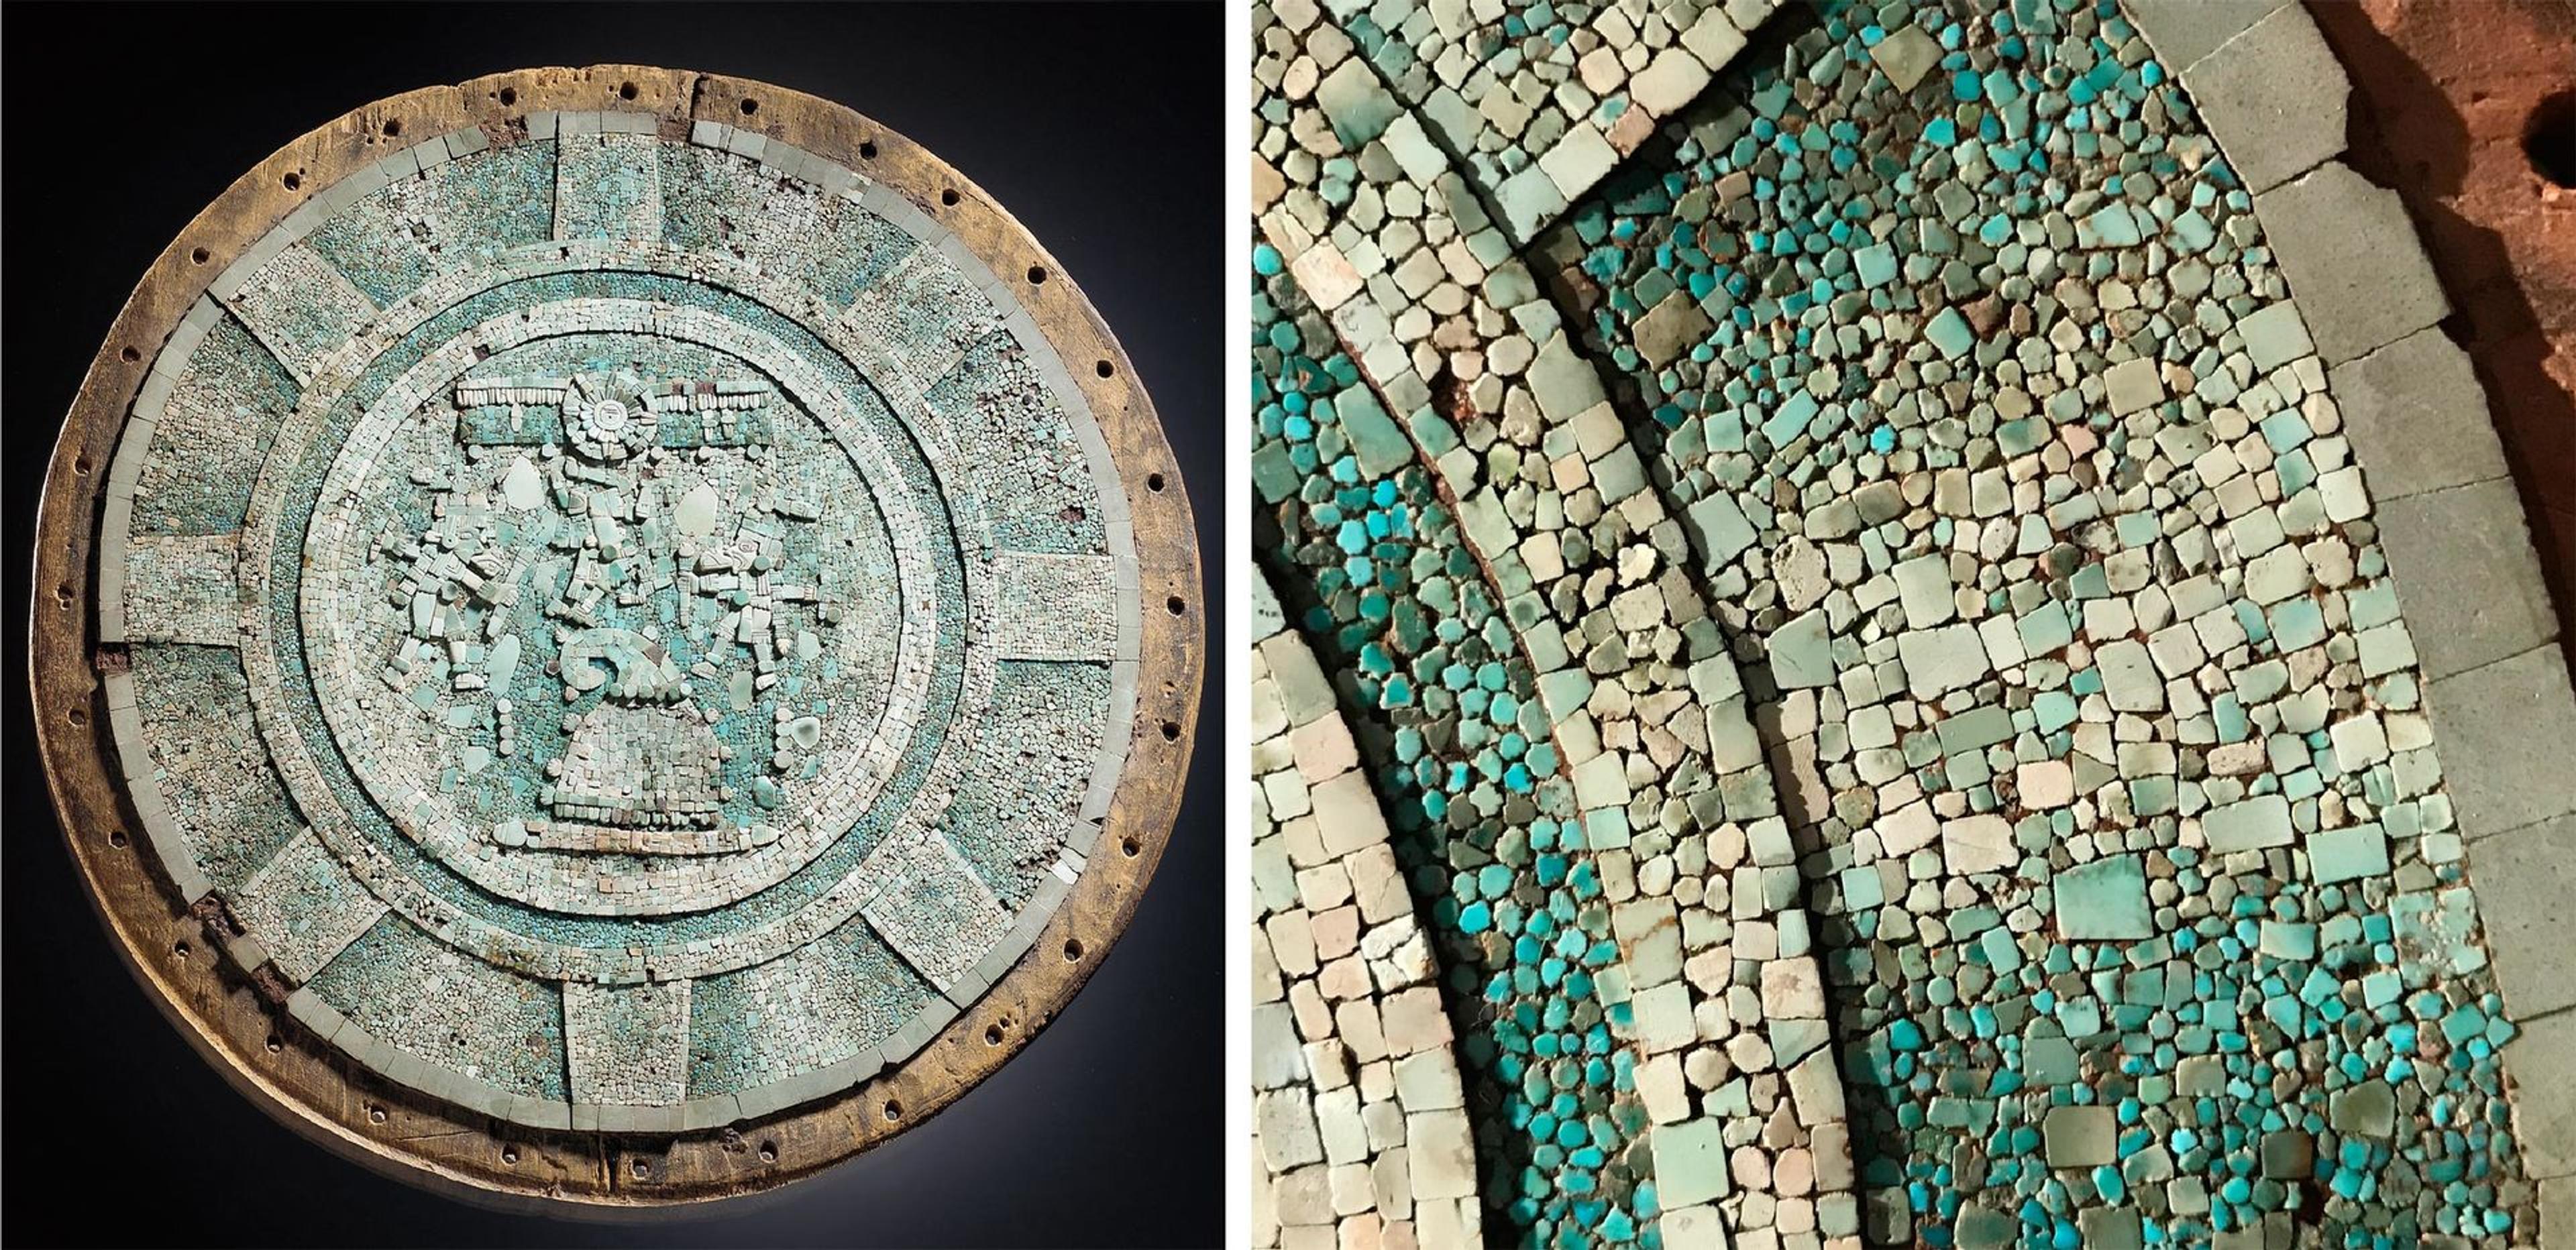 An elaborate shield from the ancient Americas made of turquoise, wood, stone, tree resin